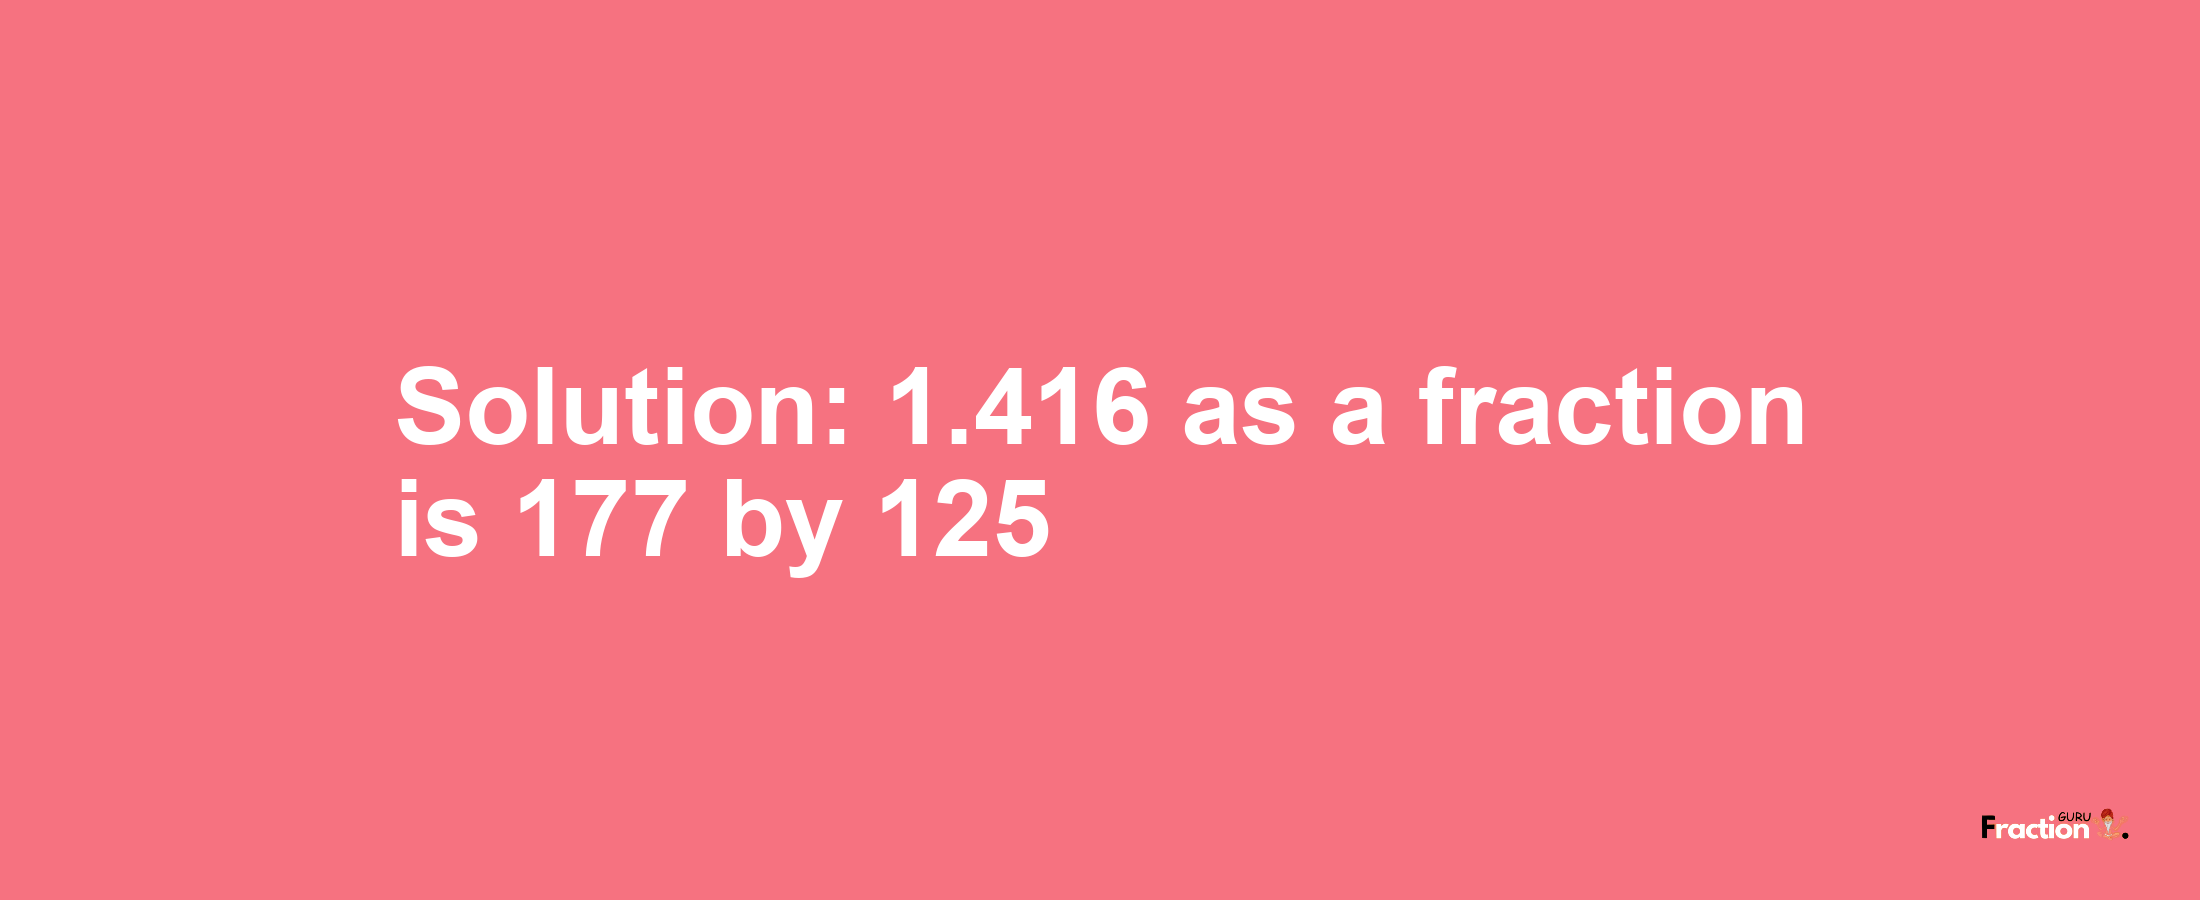 Solution:1.416 as a fraction is 177/125